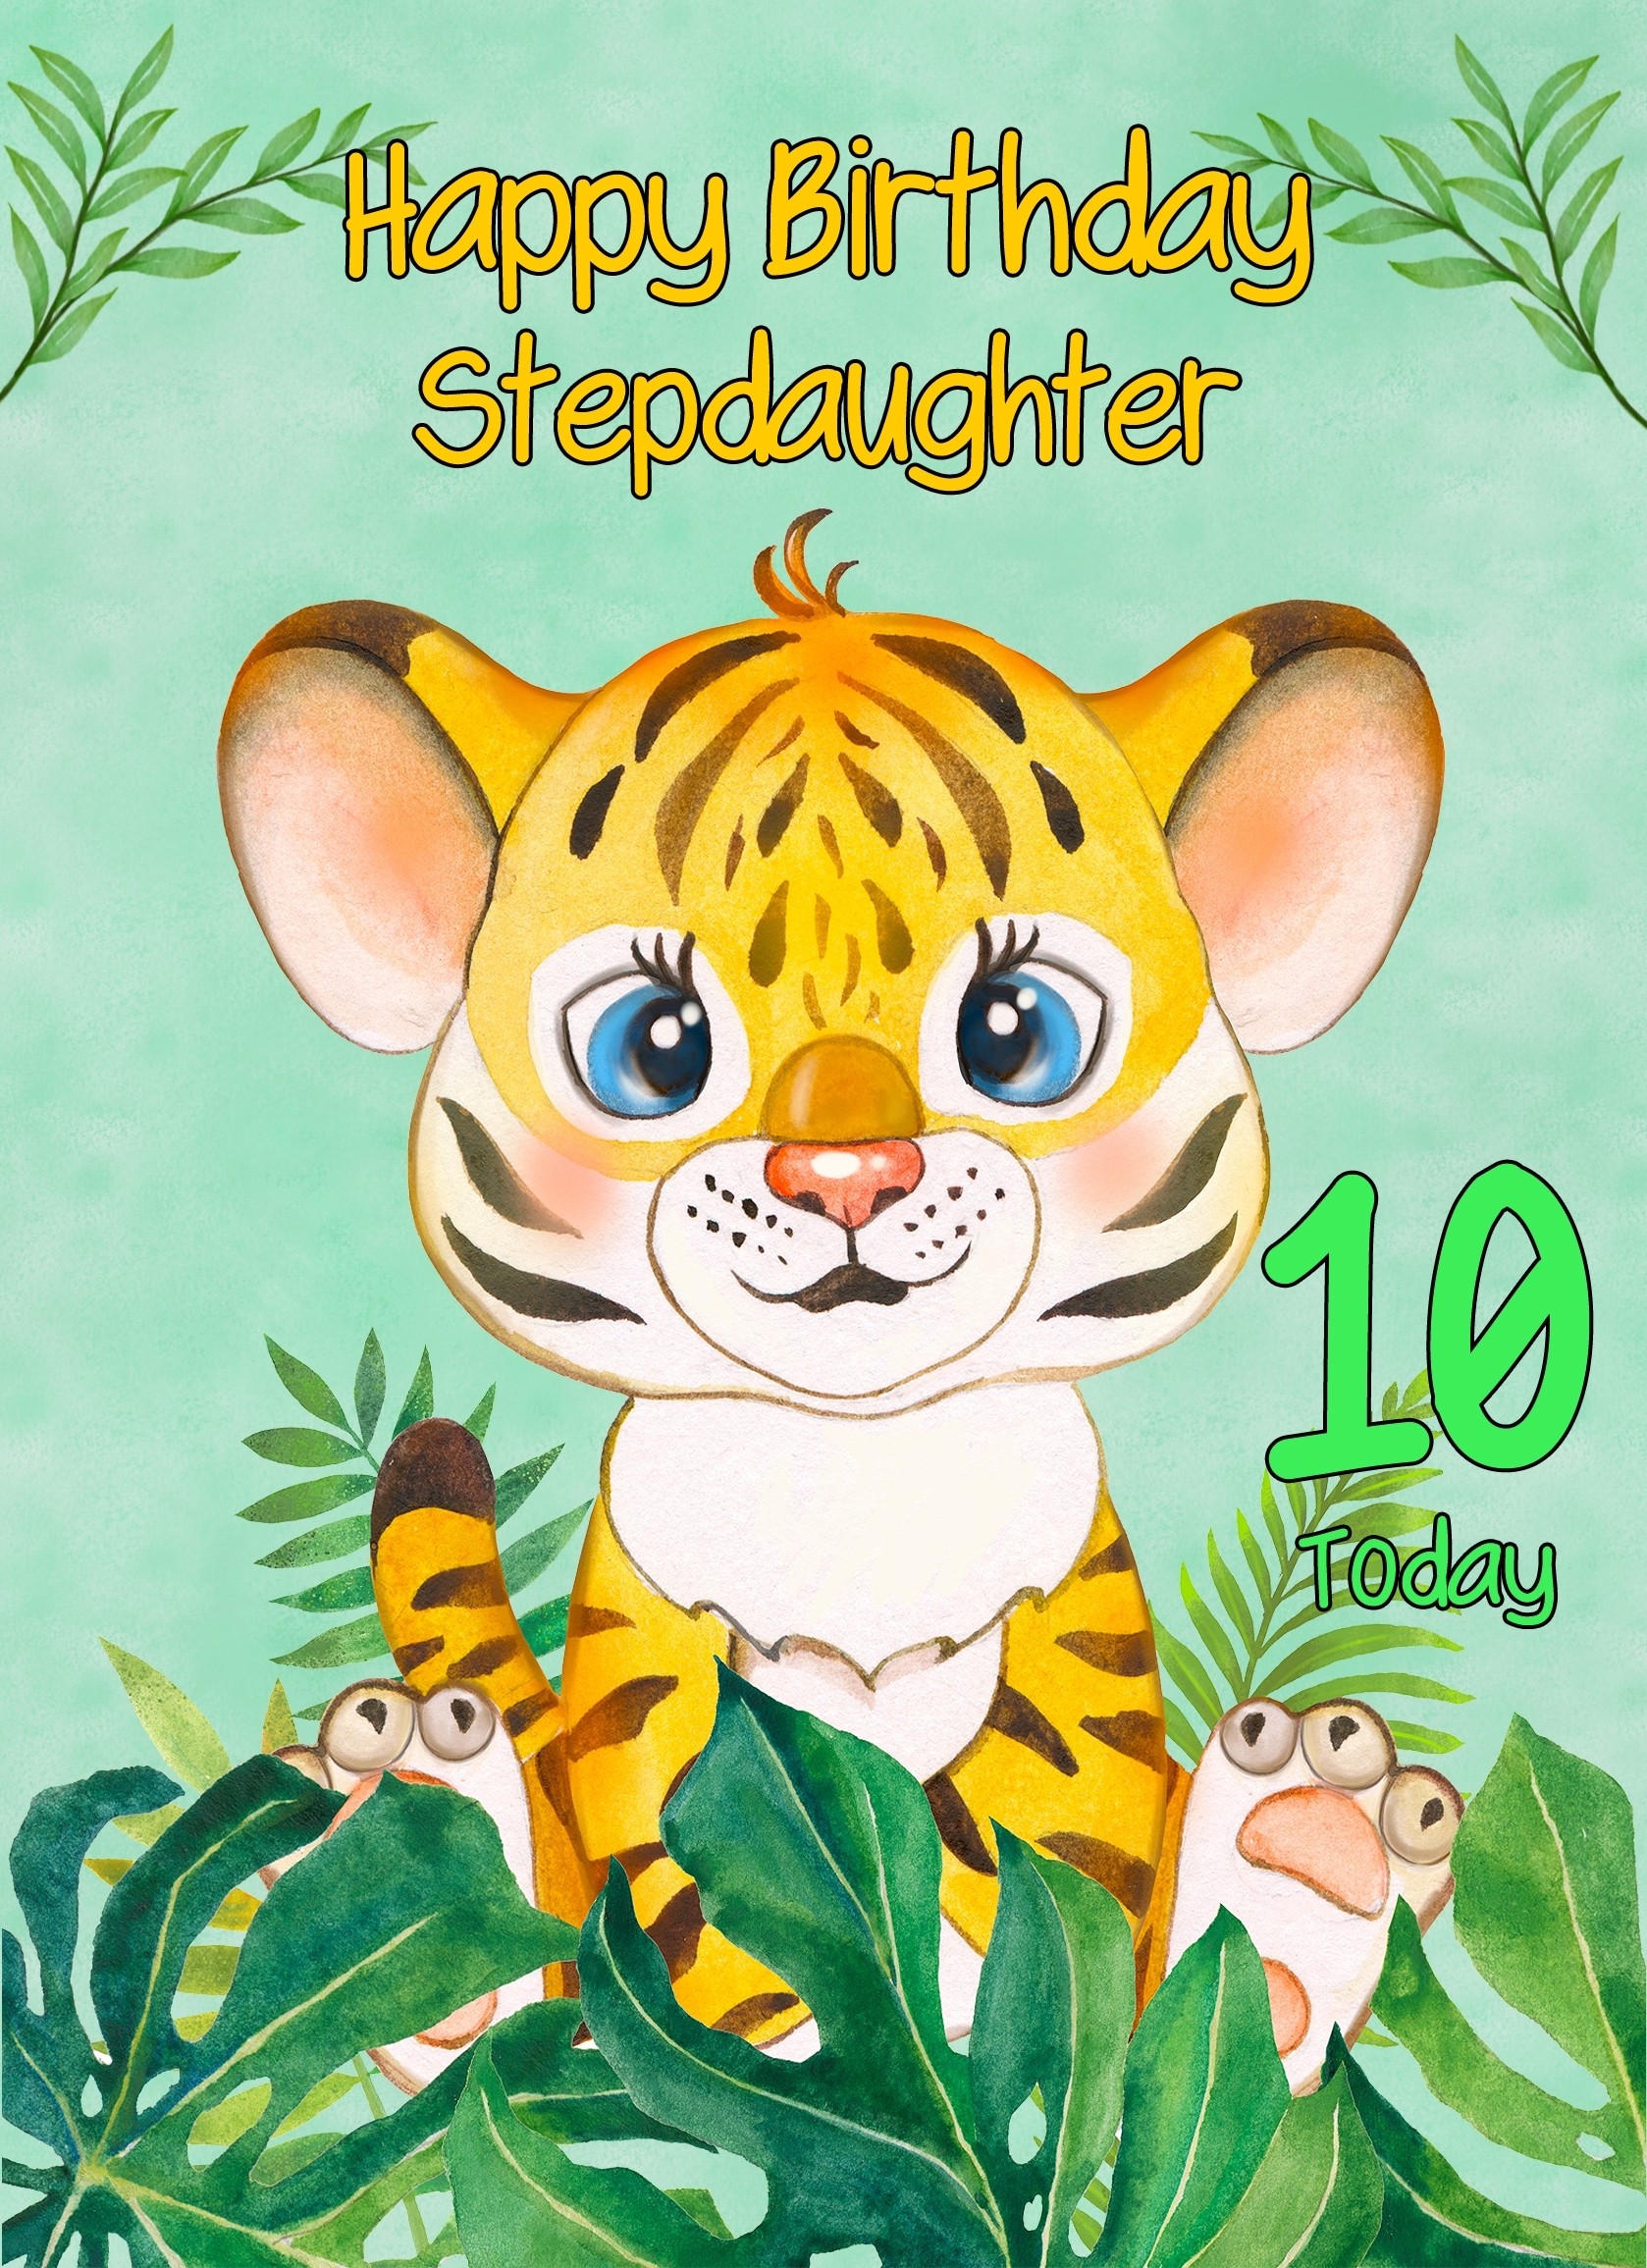 10th Birthday Card for Stepdaughter (Tiger)